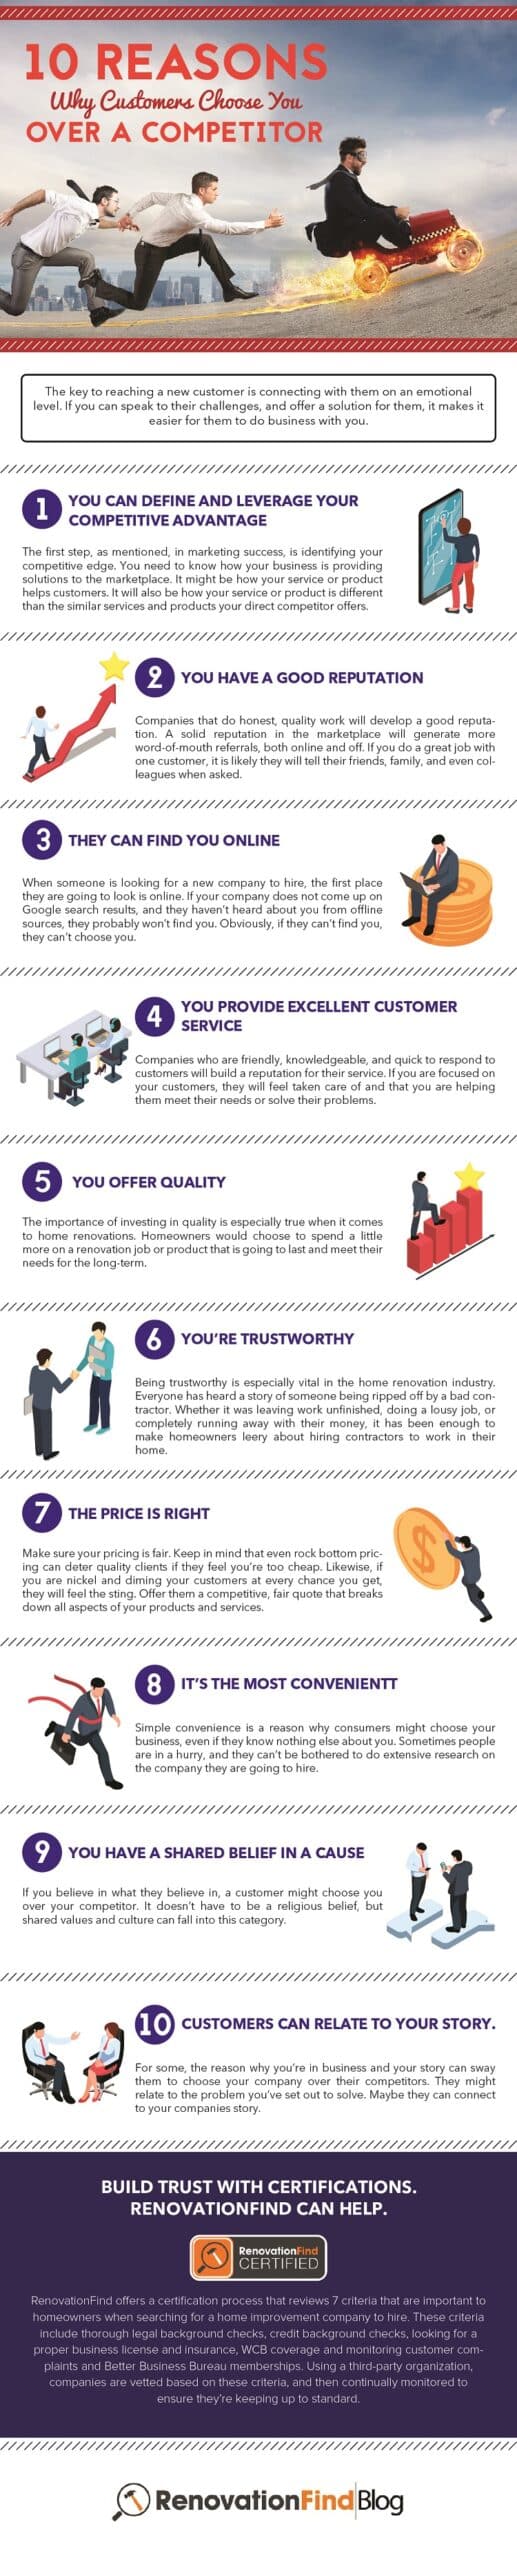 Infographic - 10 REASONS WHY CUSTOMERS CHOOSE YOU OVER A COMPETITOR